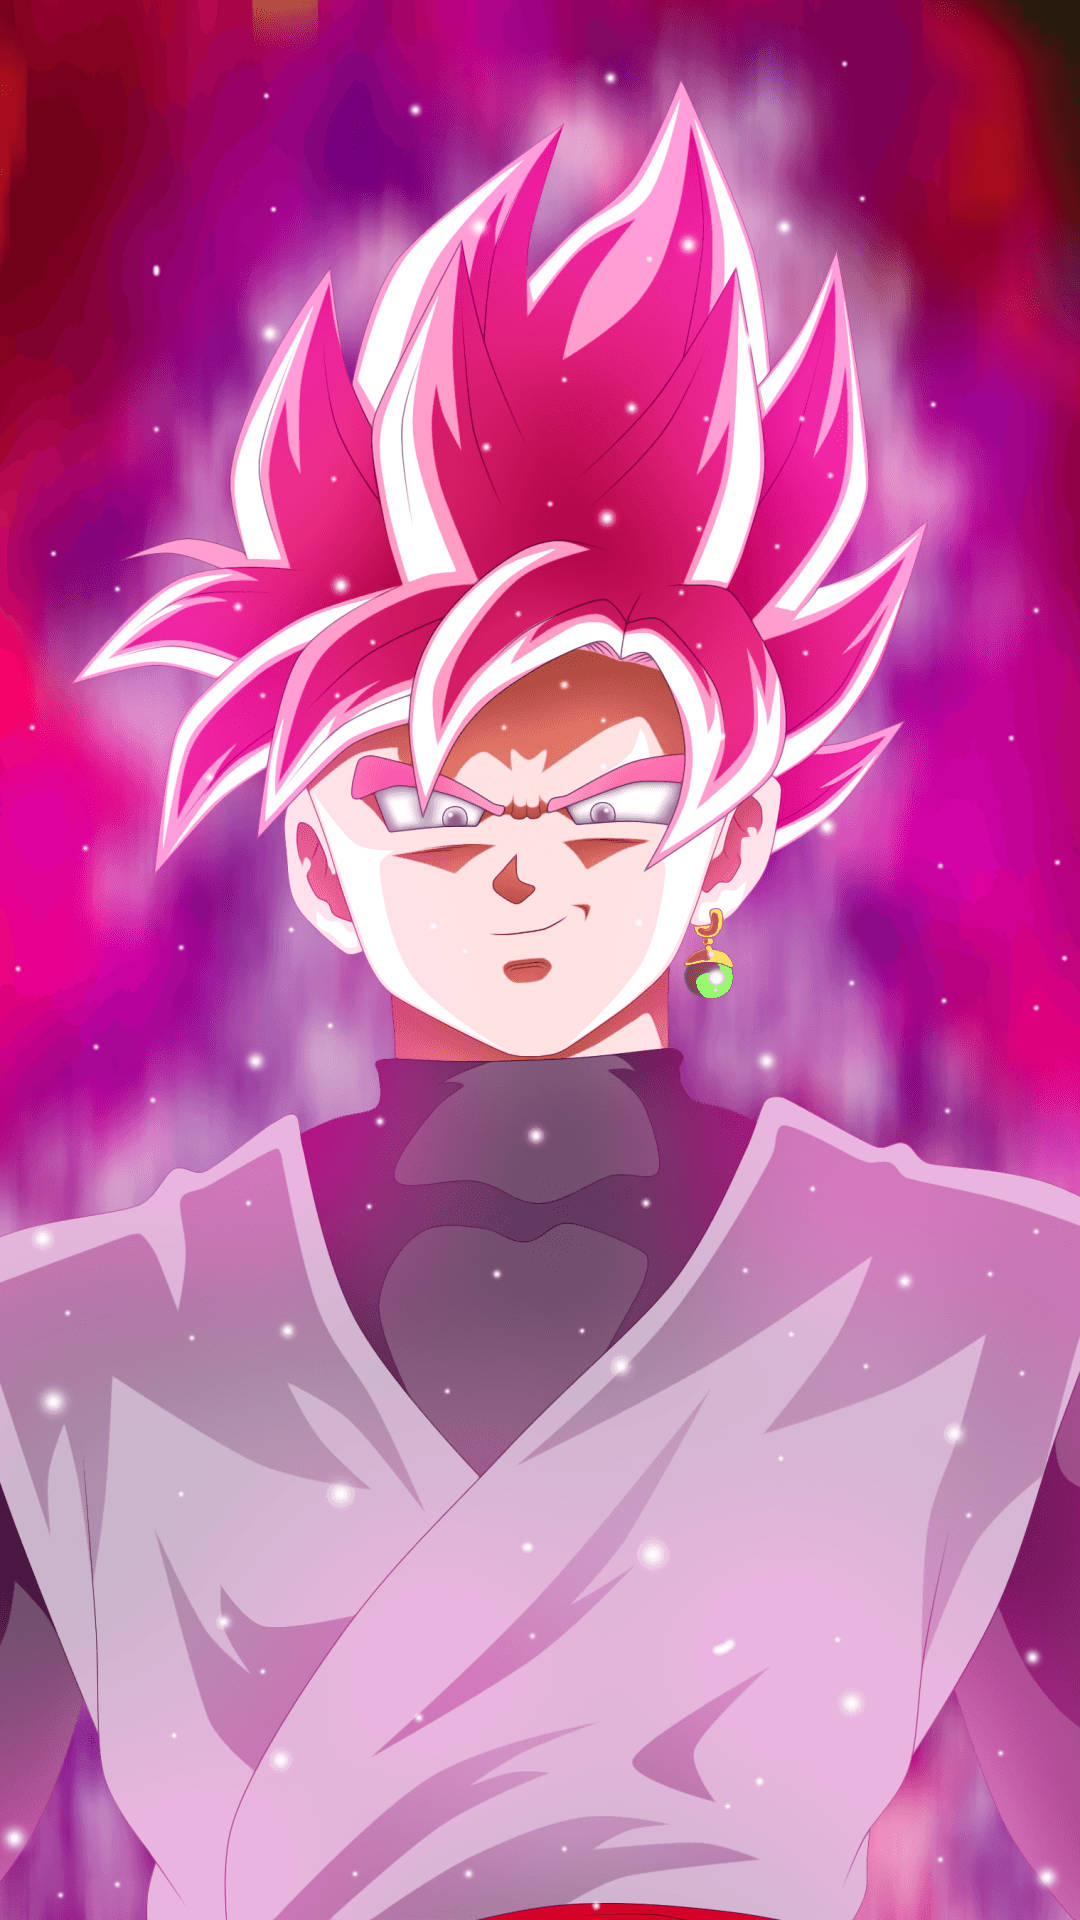 Black Goku With Glowing Pink Hair Background